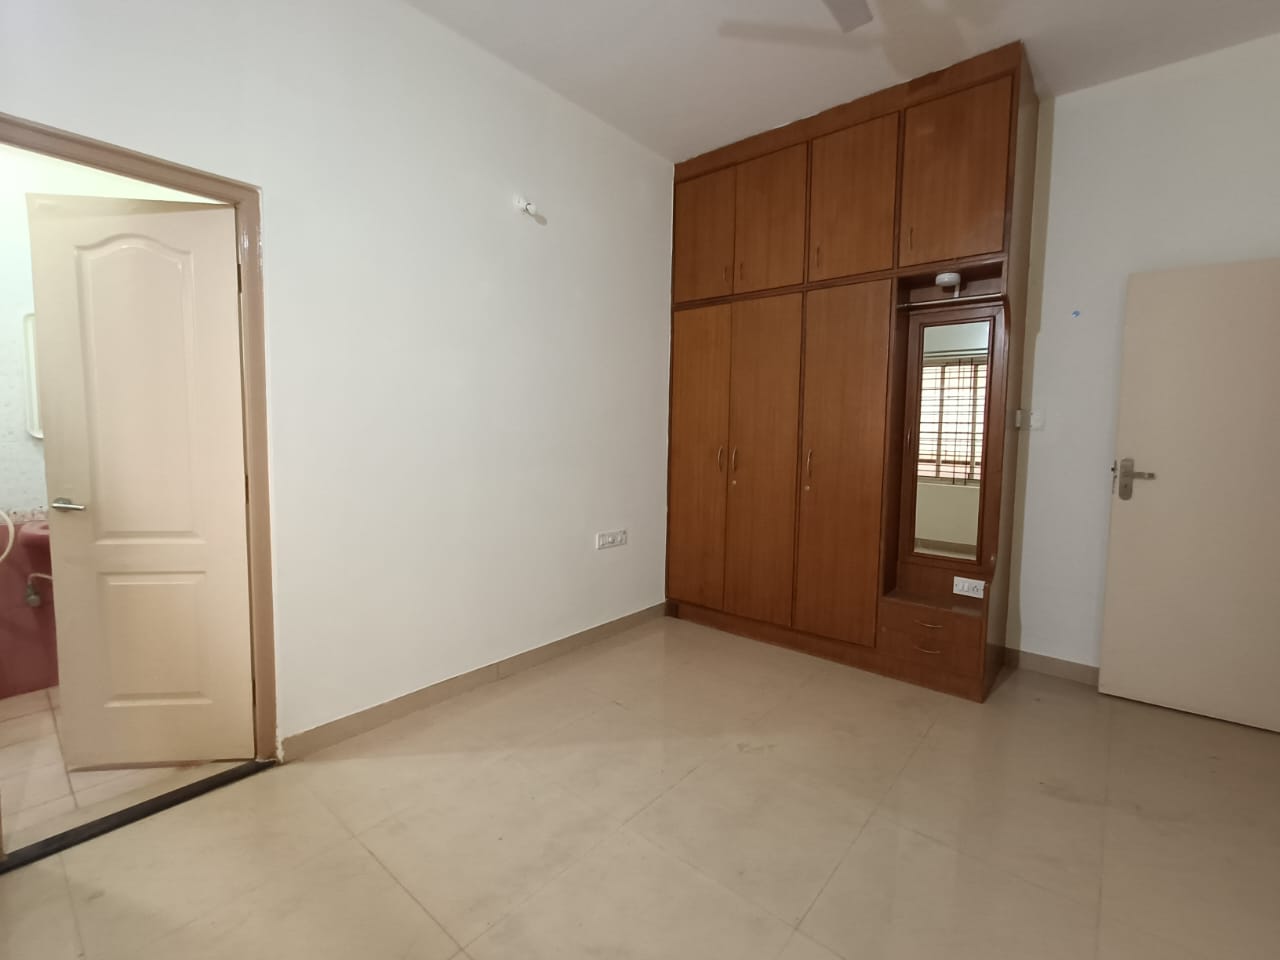 3 BHK Residential Apartment for Lease Only at JAM-7326-27Lakhs in Chandapura